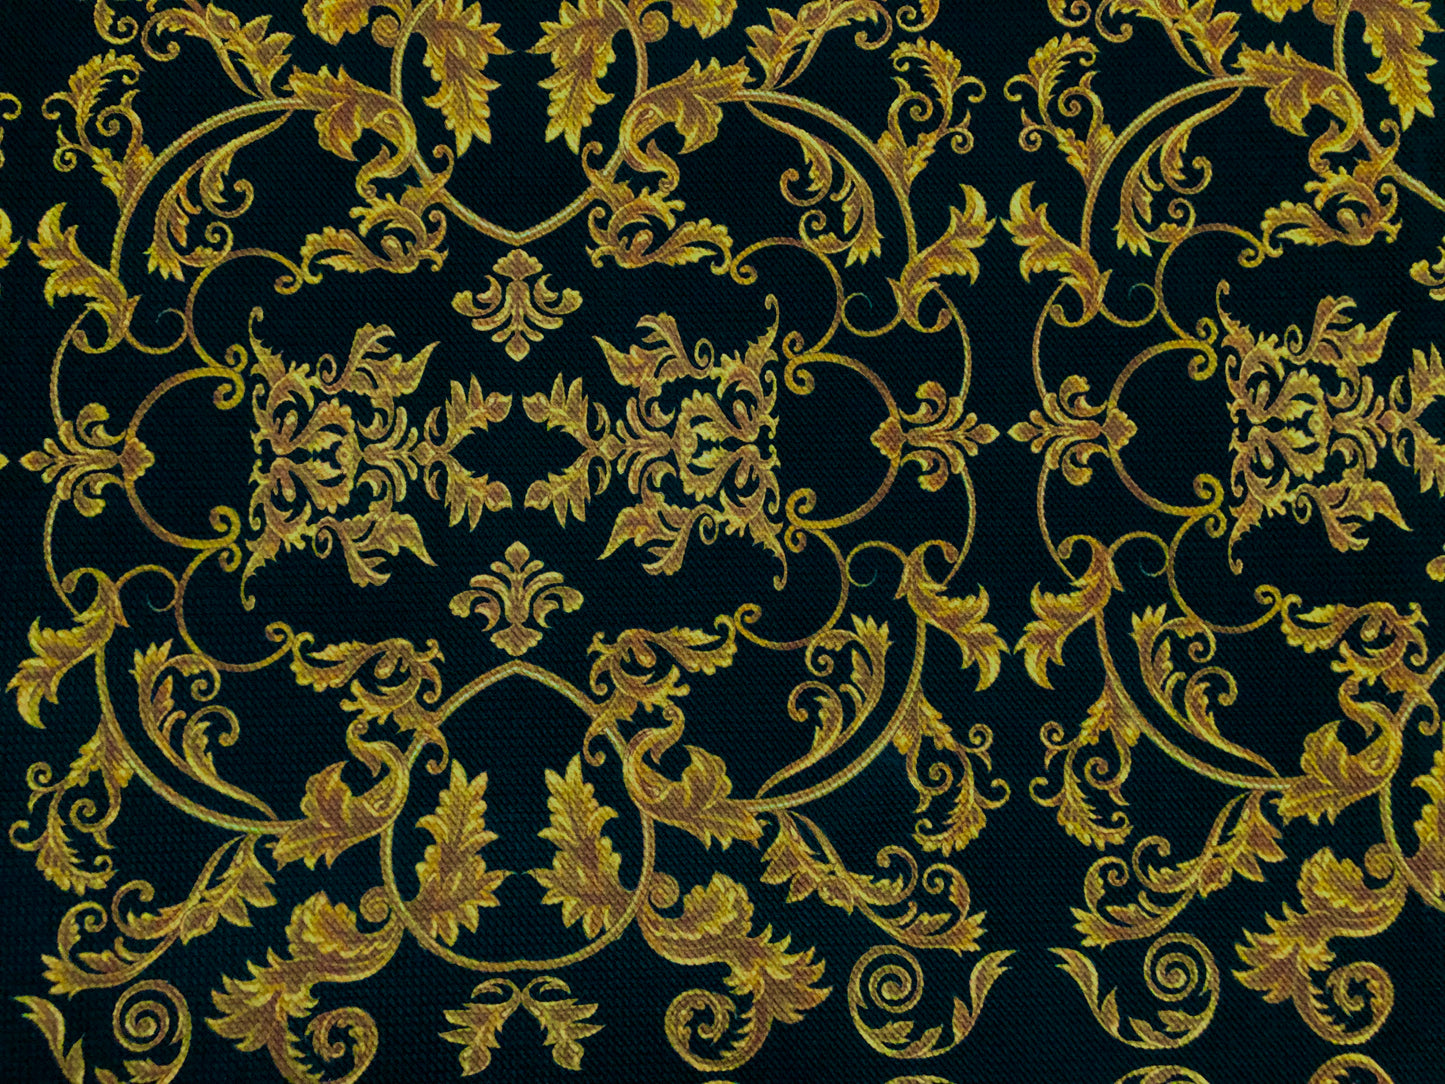 Bullet Knit Printed Fabric-Black Gold Arabic Damask-BPR251-Sold by the Yard